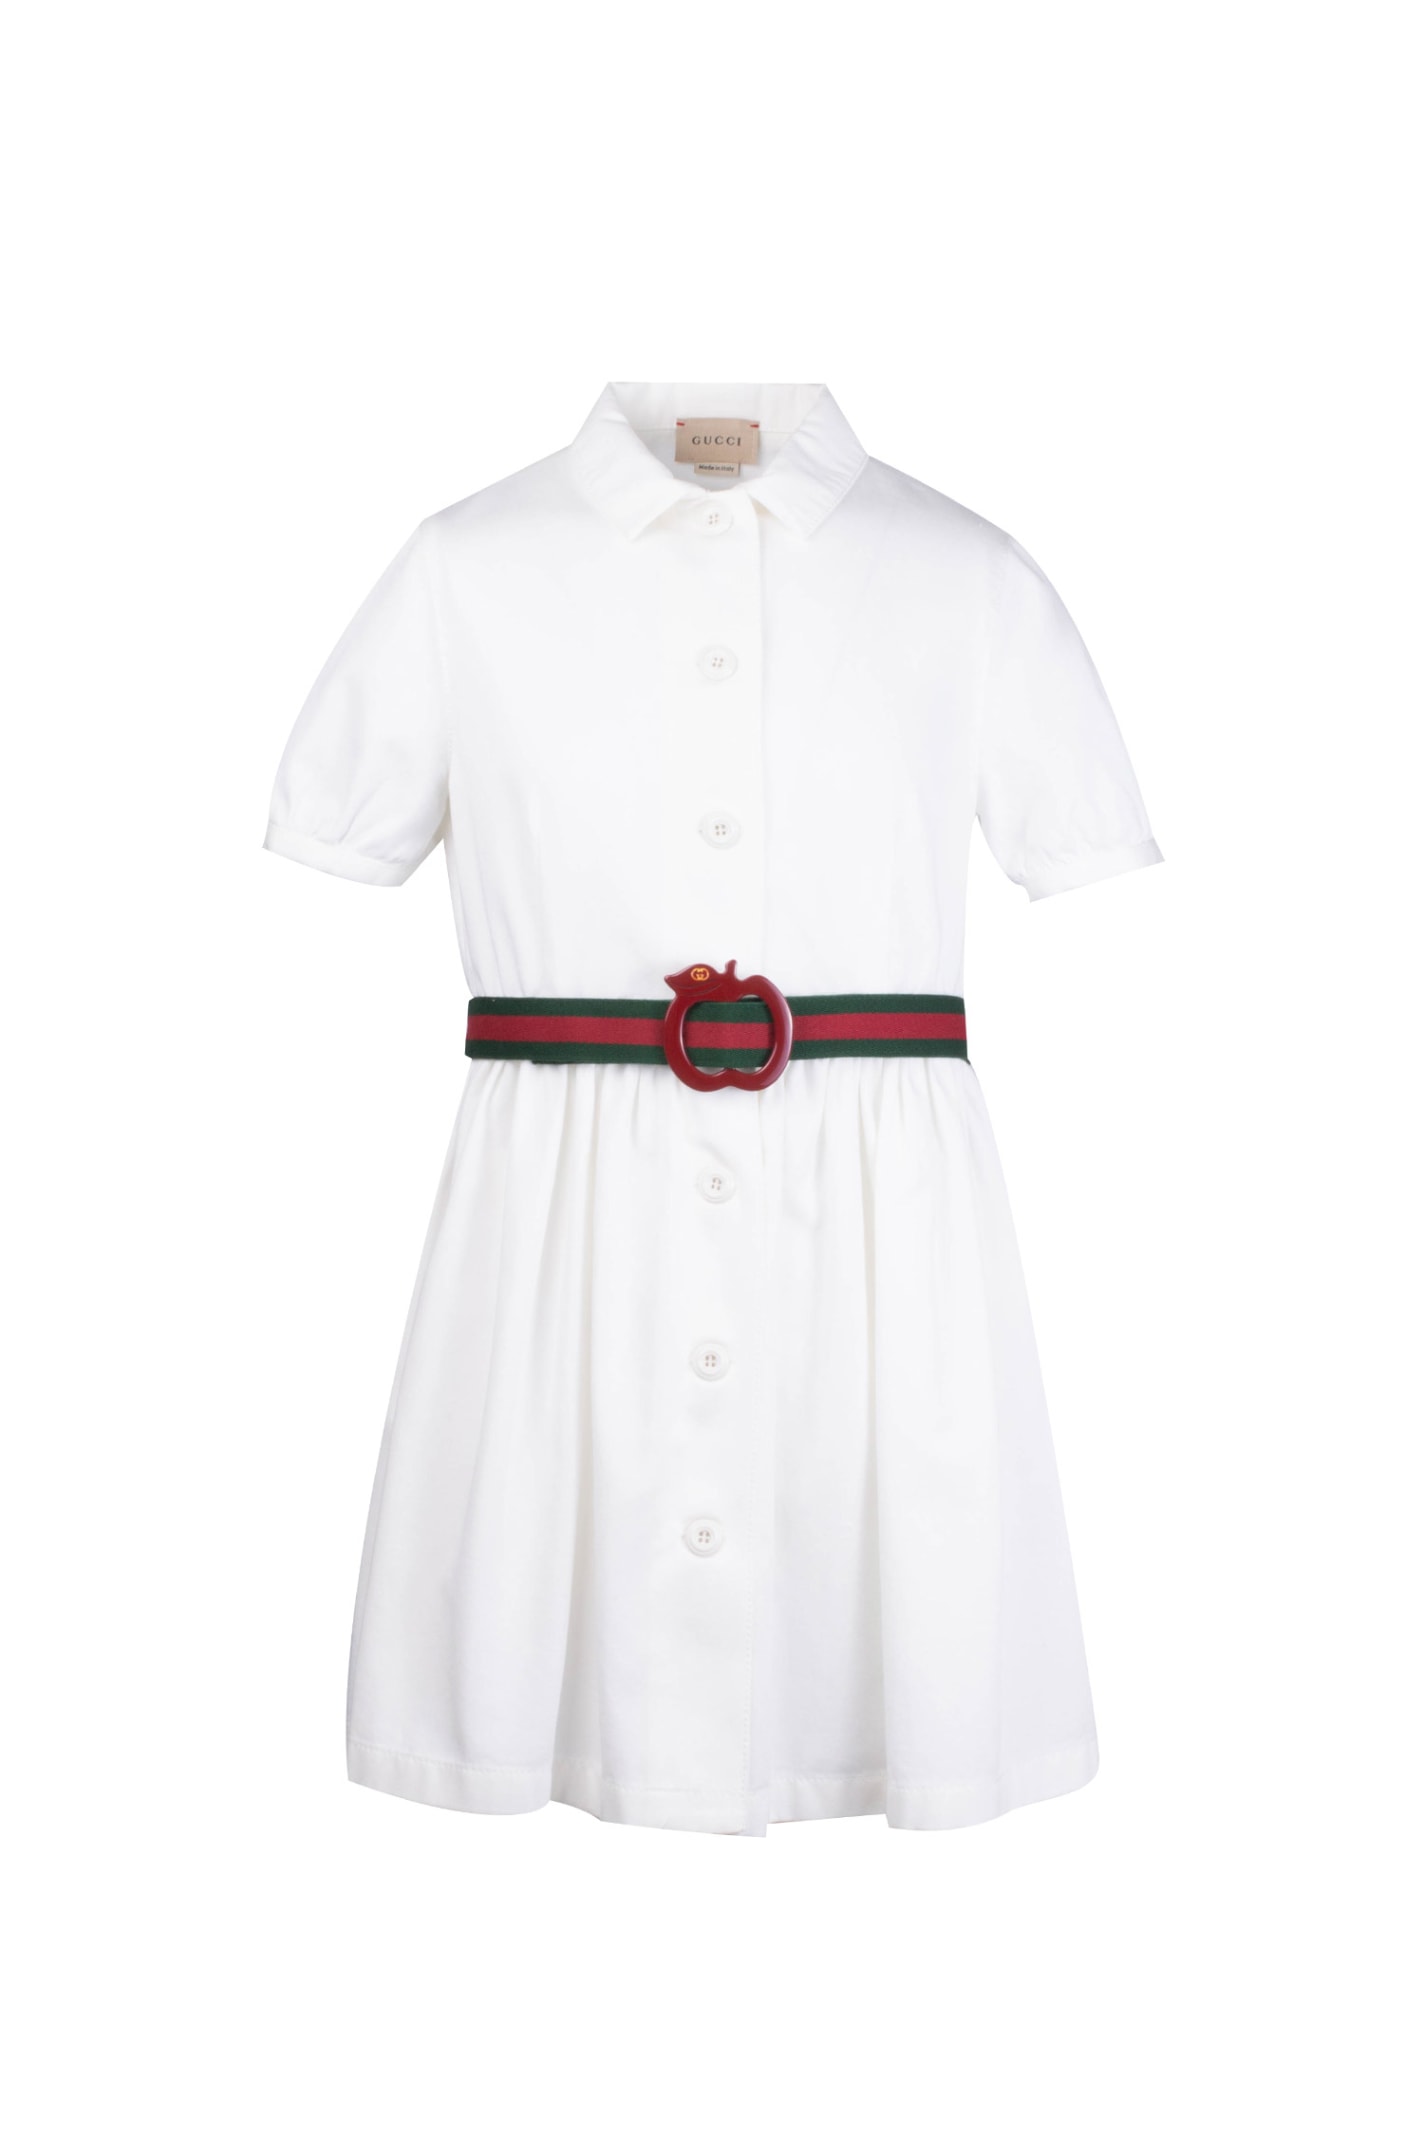 Gucci Cotton Dress With Apple Buckle